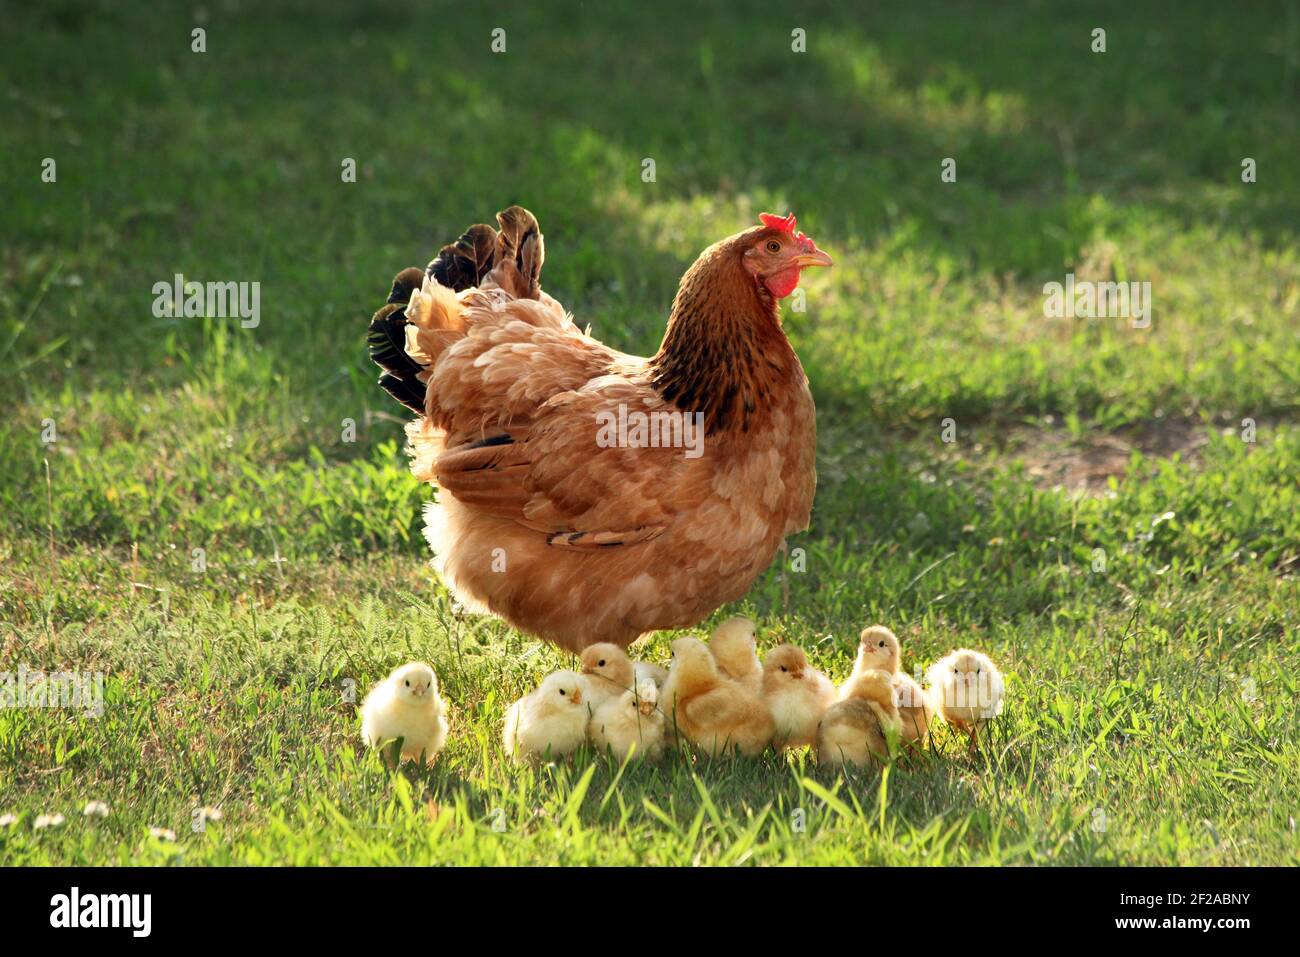 https://c8.alamy.com/comp/2F2ABNY/mother-hen-with-chickens-in-a-rural-yardchickens-in-a-grass-in-the-village-against-sun-photosgallus-gallus-domesticuspoultry-organic-farmsustainab-2F2ABNY.jpg